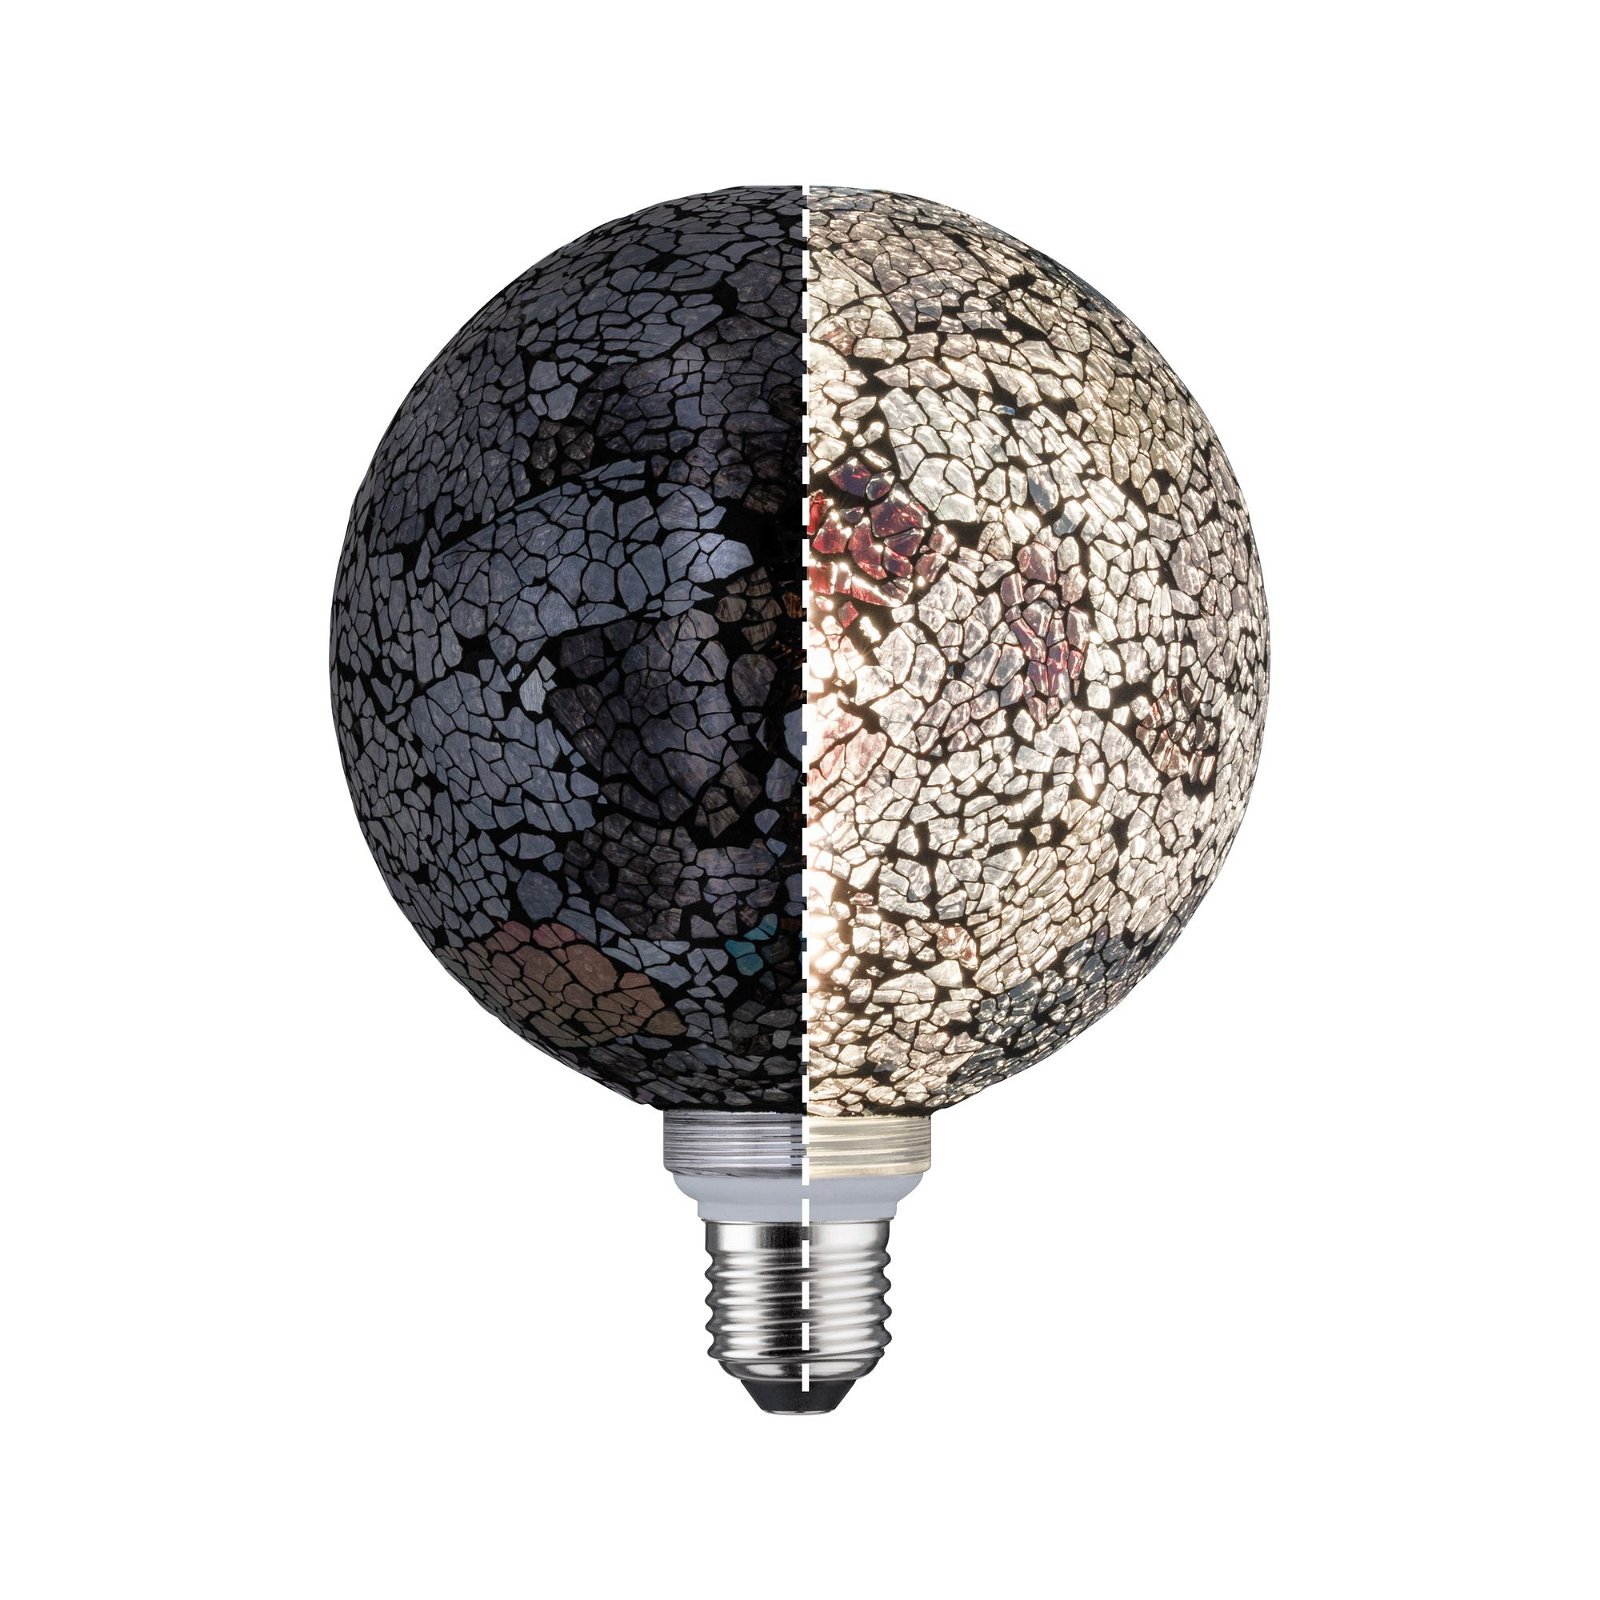 Miracle Mosaic Edition 230 V Standard LED Globe G125 E27 470lm 5W 2700K dimmable Black